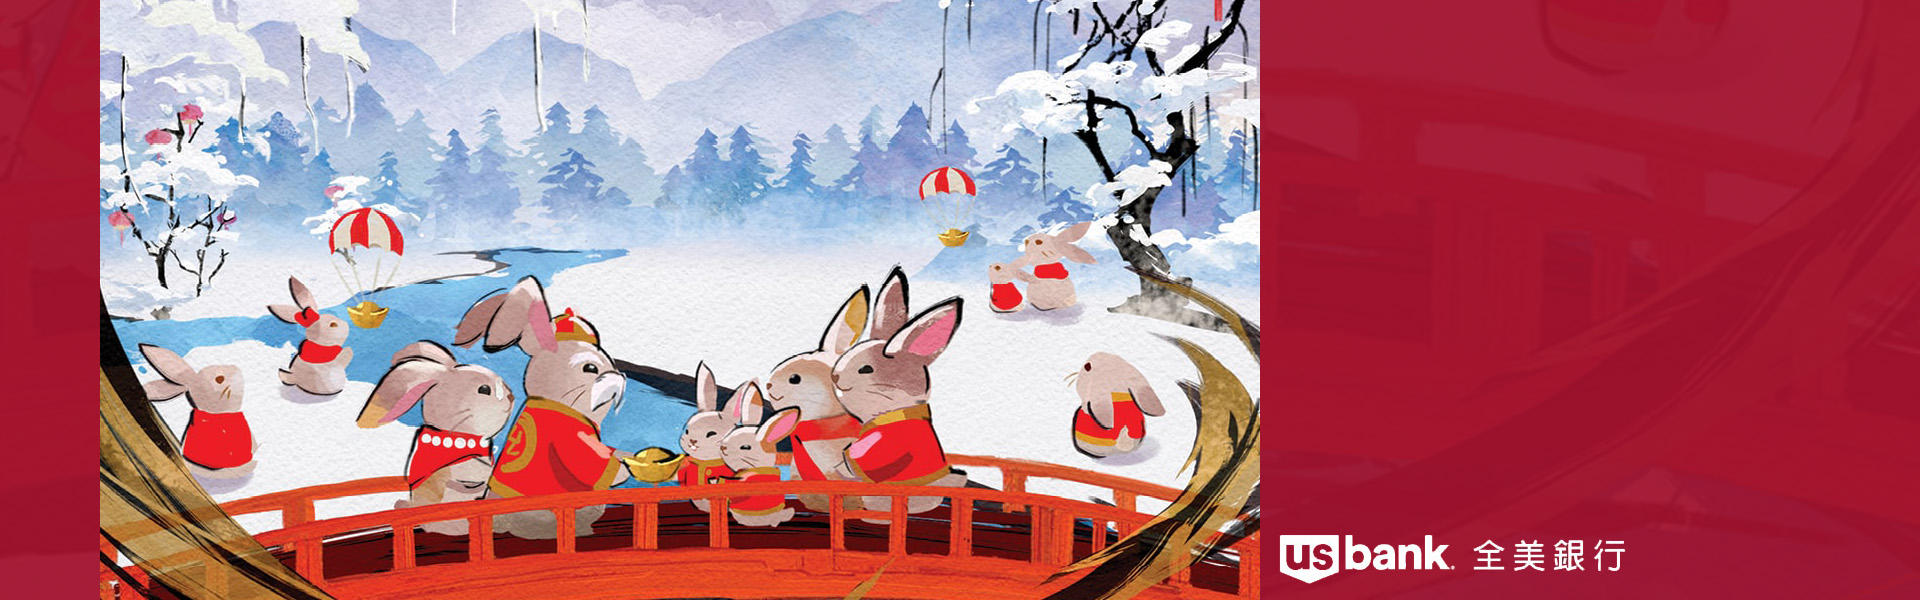 A snowy landscape with rabbits crossing a bridge in the foreground. Artwork from the 2023 Year of the Rabbit U.S. Bank calendar.